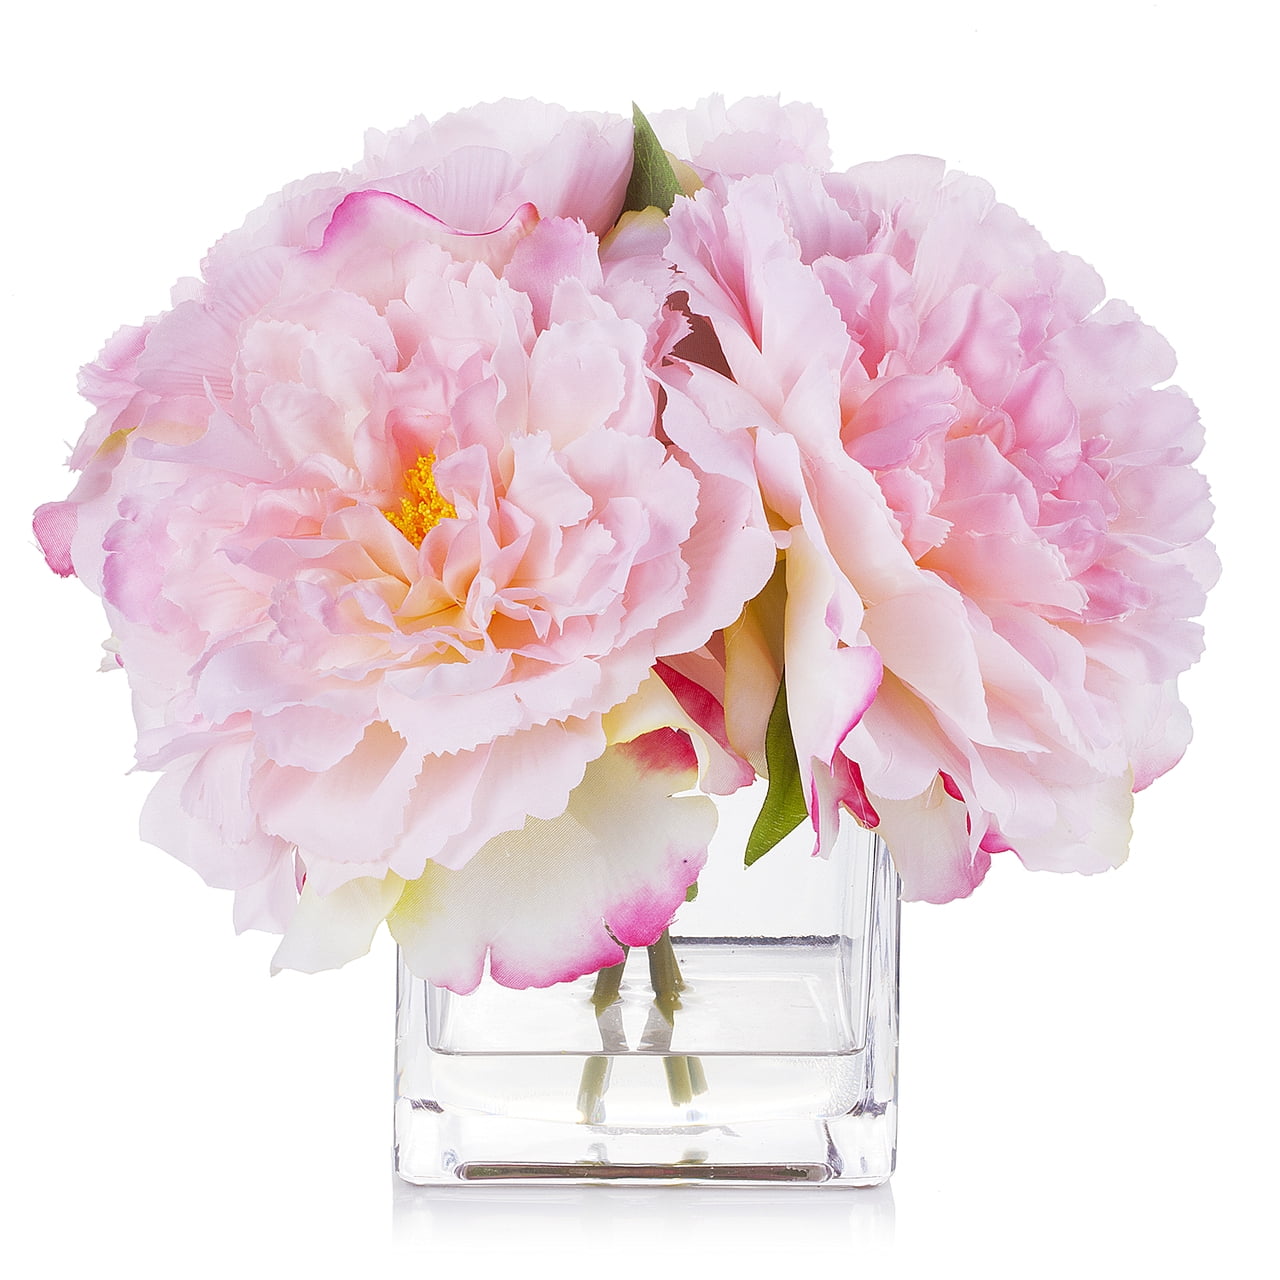 Enova Floral Artificial Flowers Silk Peony Fake Flowers Arrangement in Cube Glass Vase with Faux Water for Home Office Wedding Event Decoration Cream 